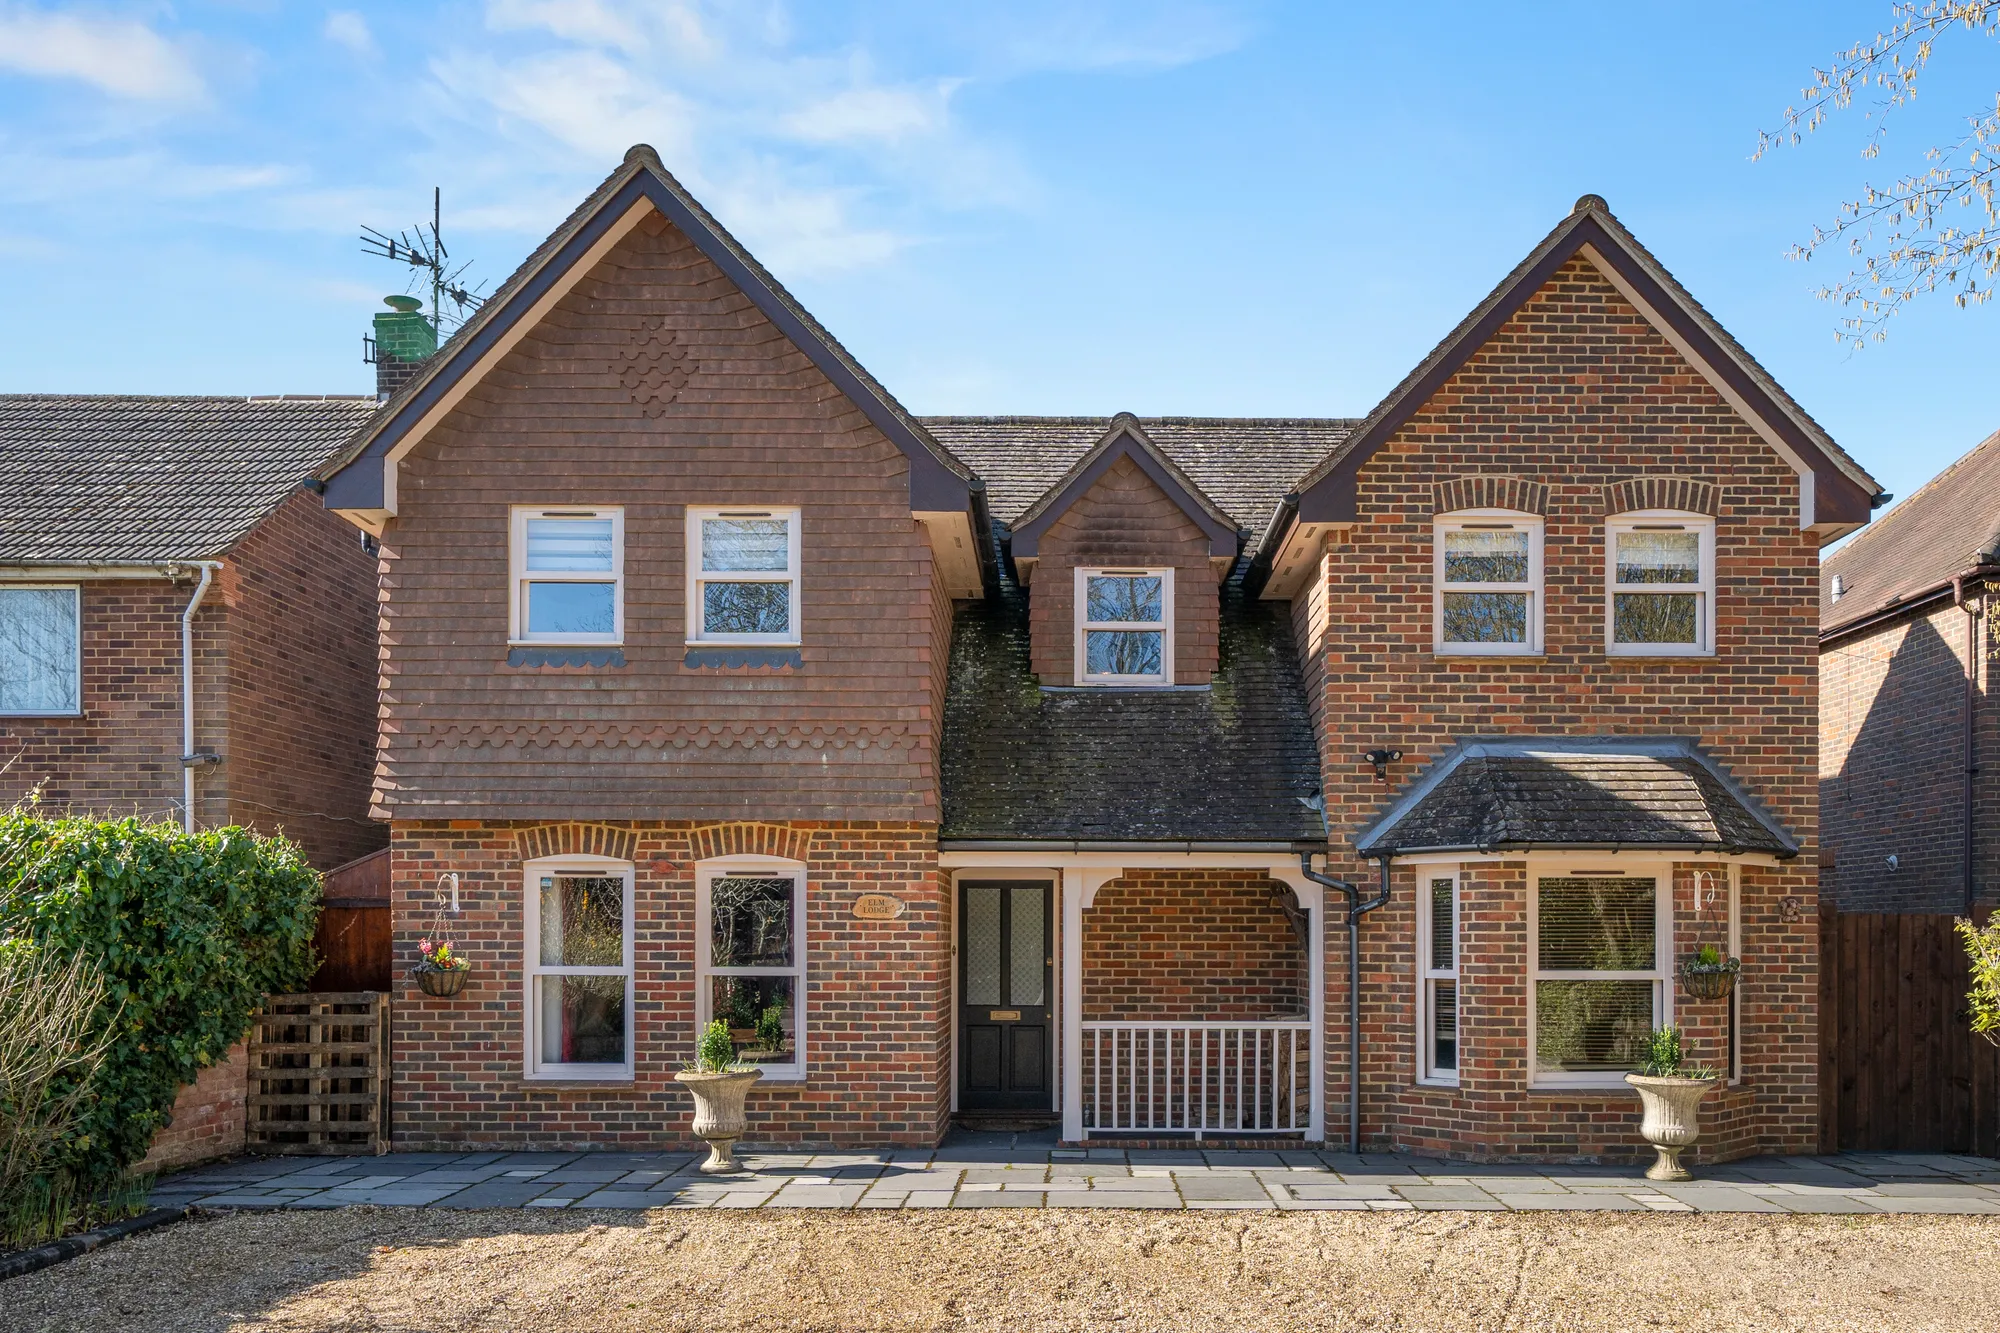 4 bed detached house for sale in Church Road, Windlesham  - Property Image 2